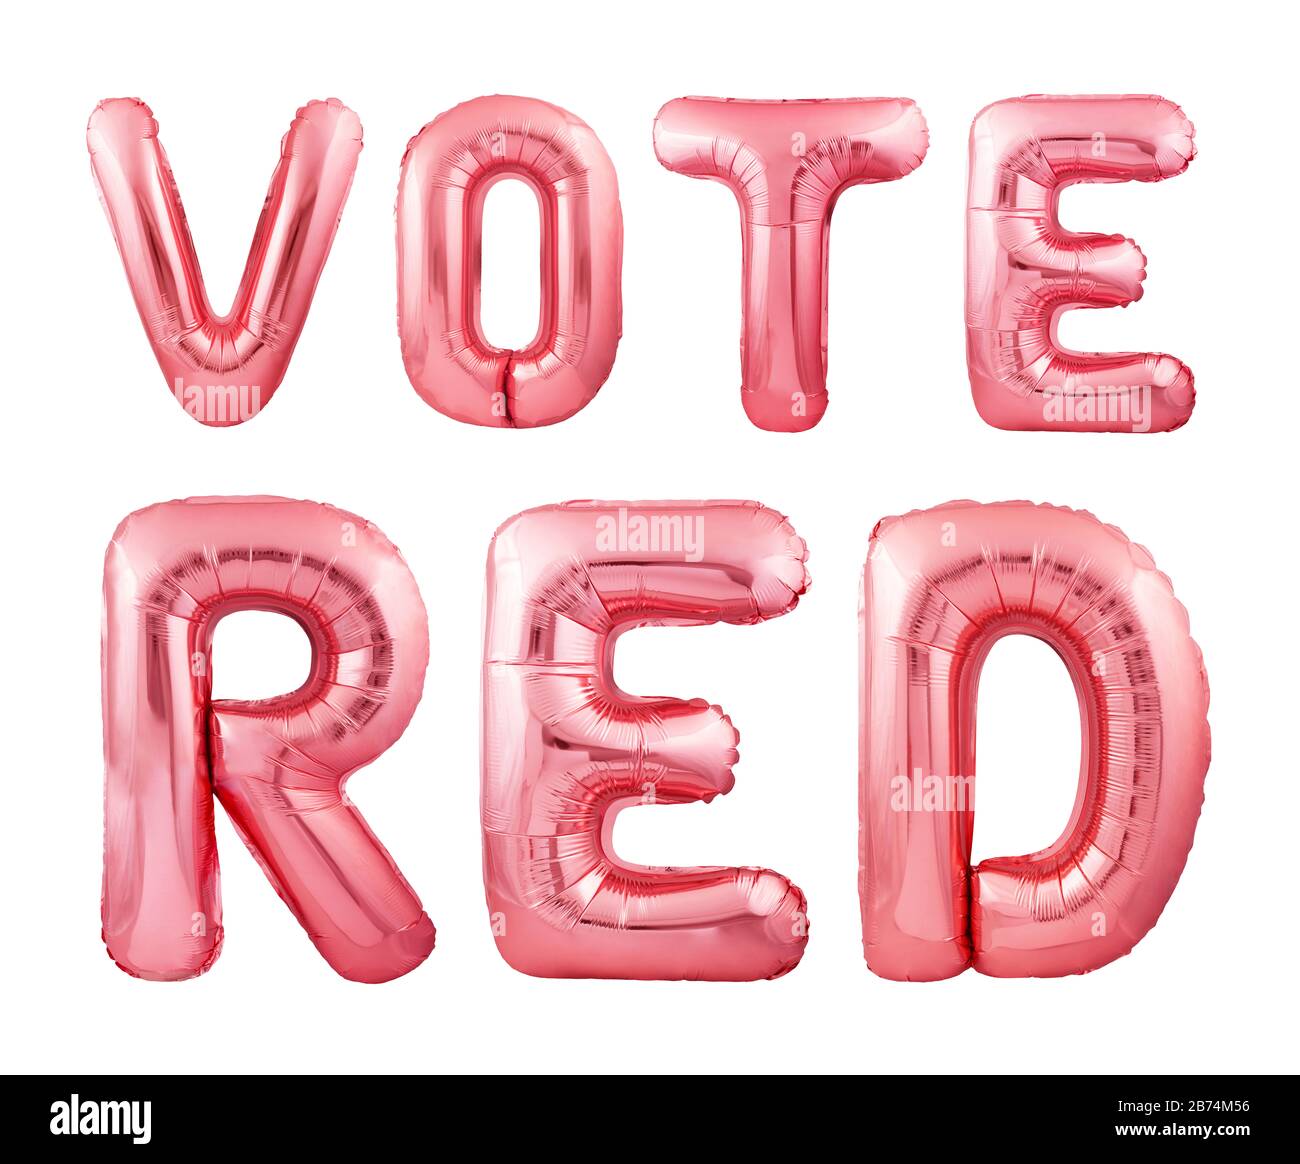 Vote red republican election campaign concept made of red inflatable balloons isolated on white background Stock Photo